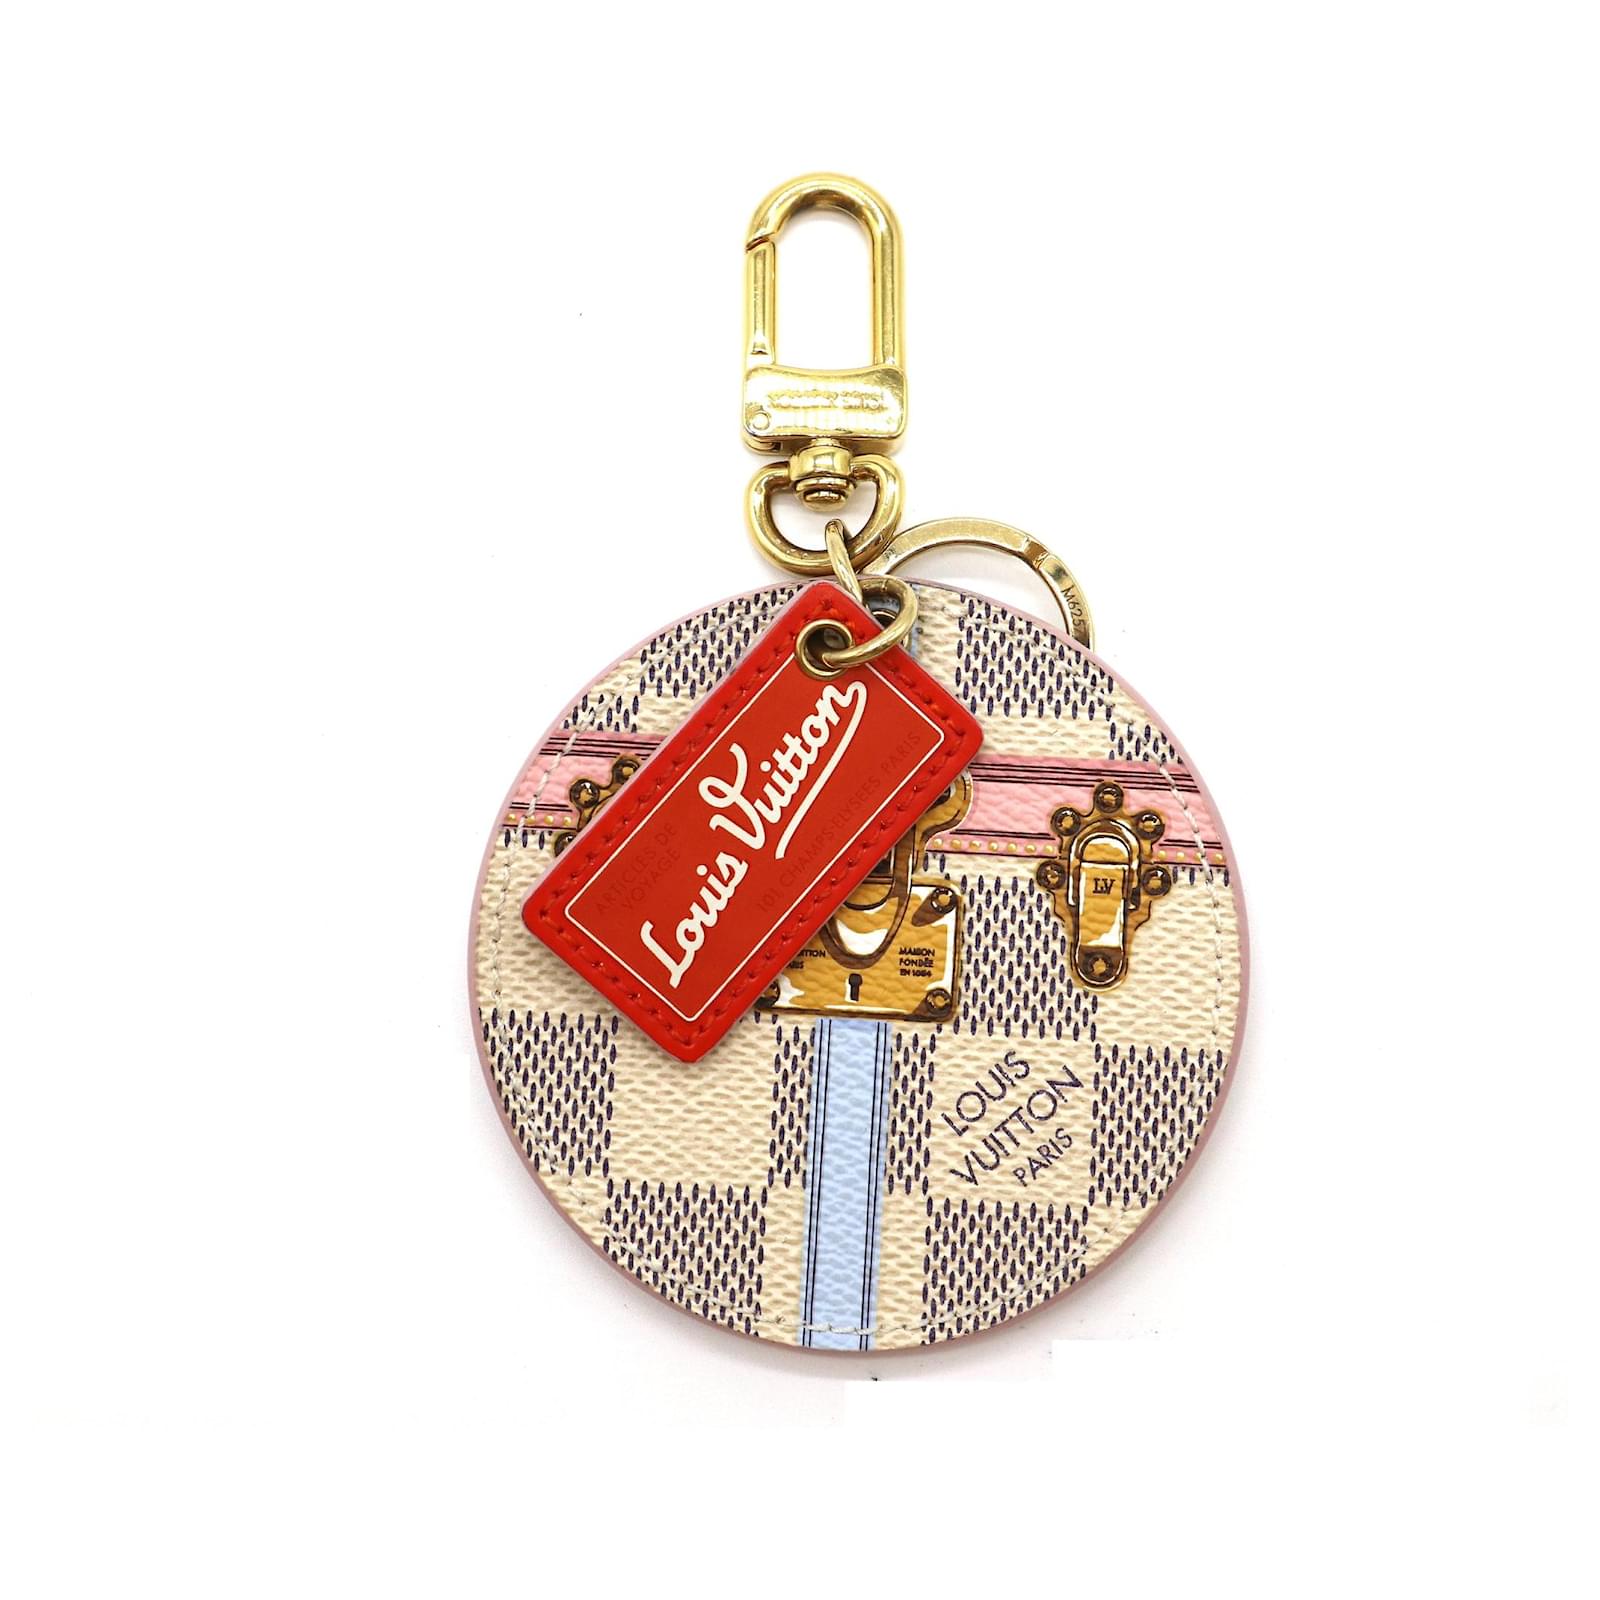 Louis Vuitton Round Leather Keychain Bag Charm Red Gold Free Shipping